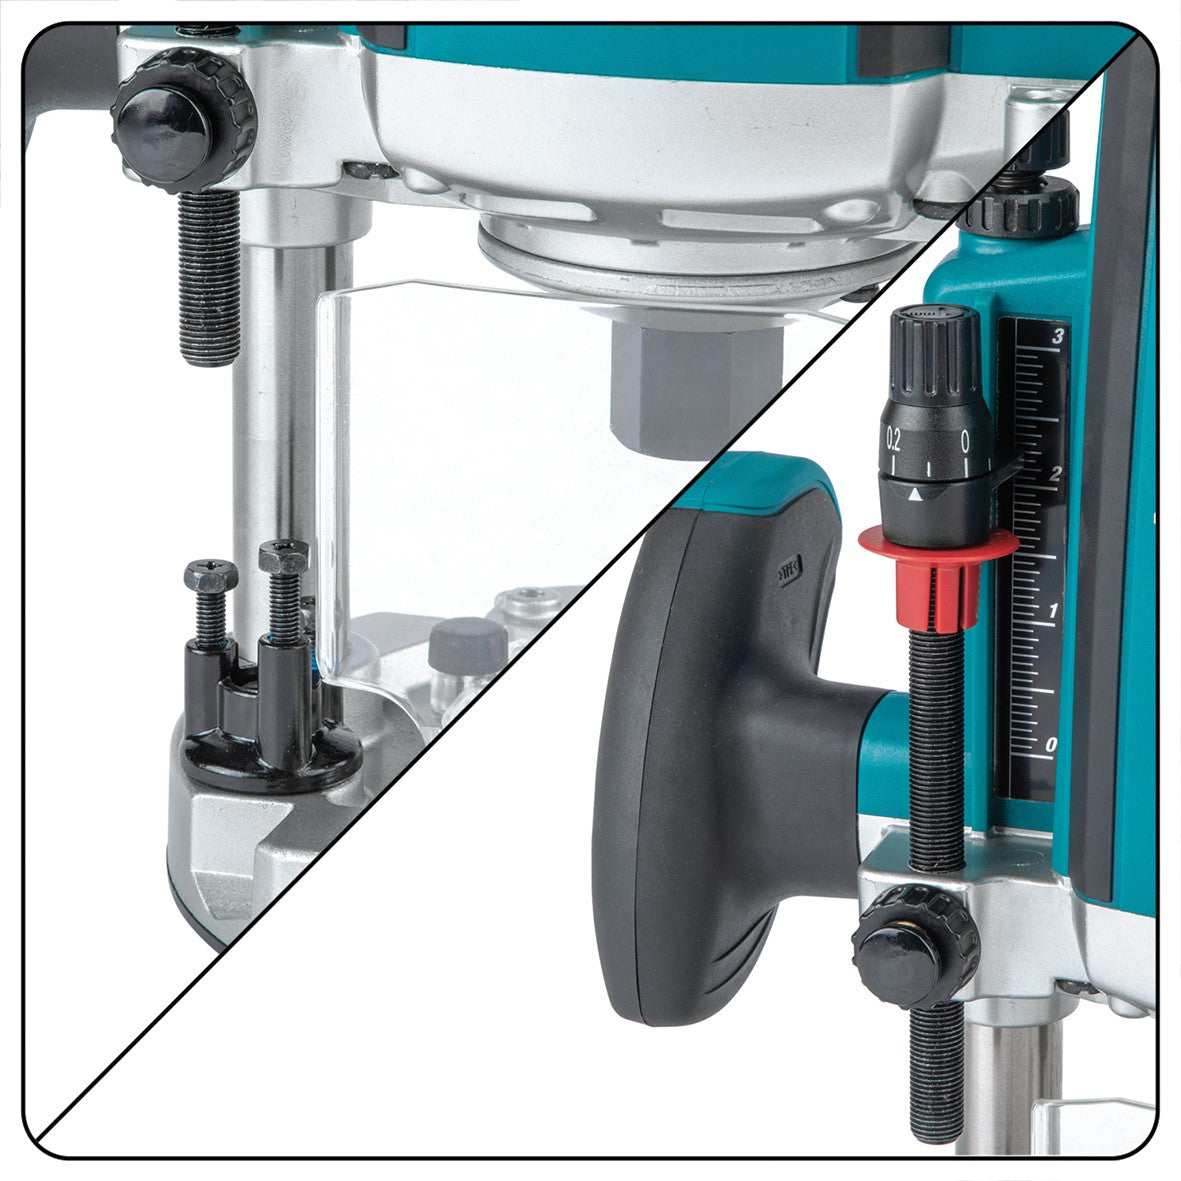 1850W (1/2") Router Plunge RP1800X05 by Makita